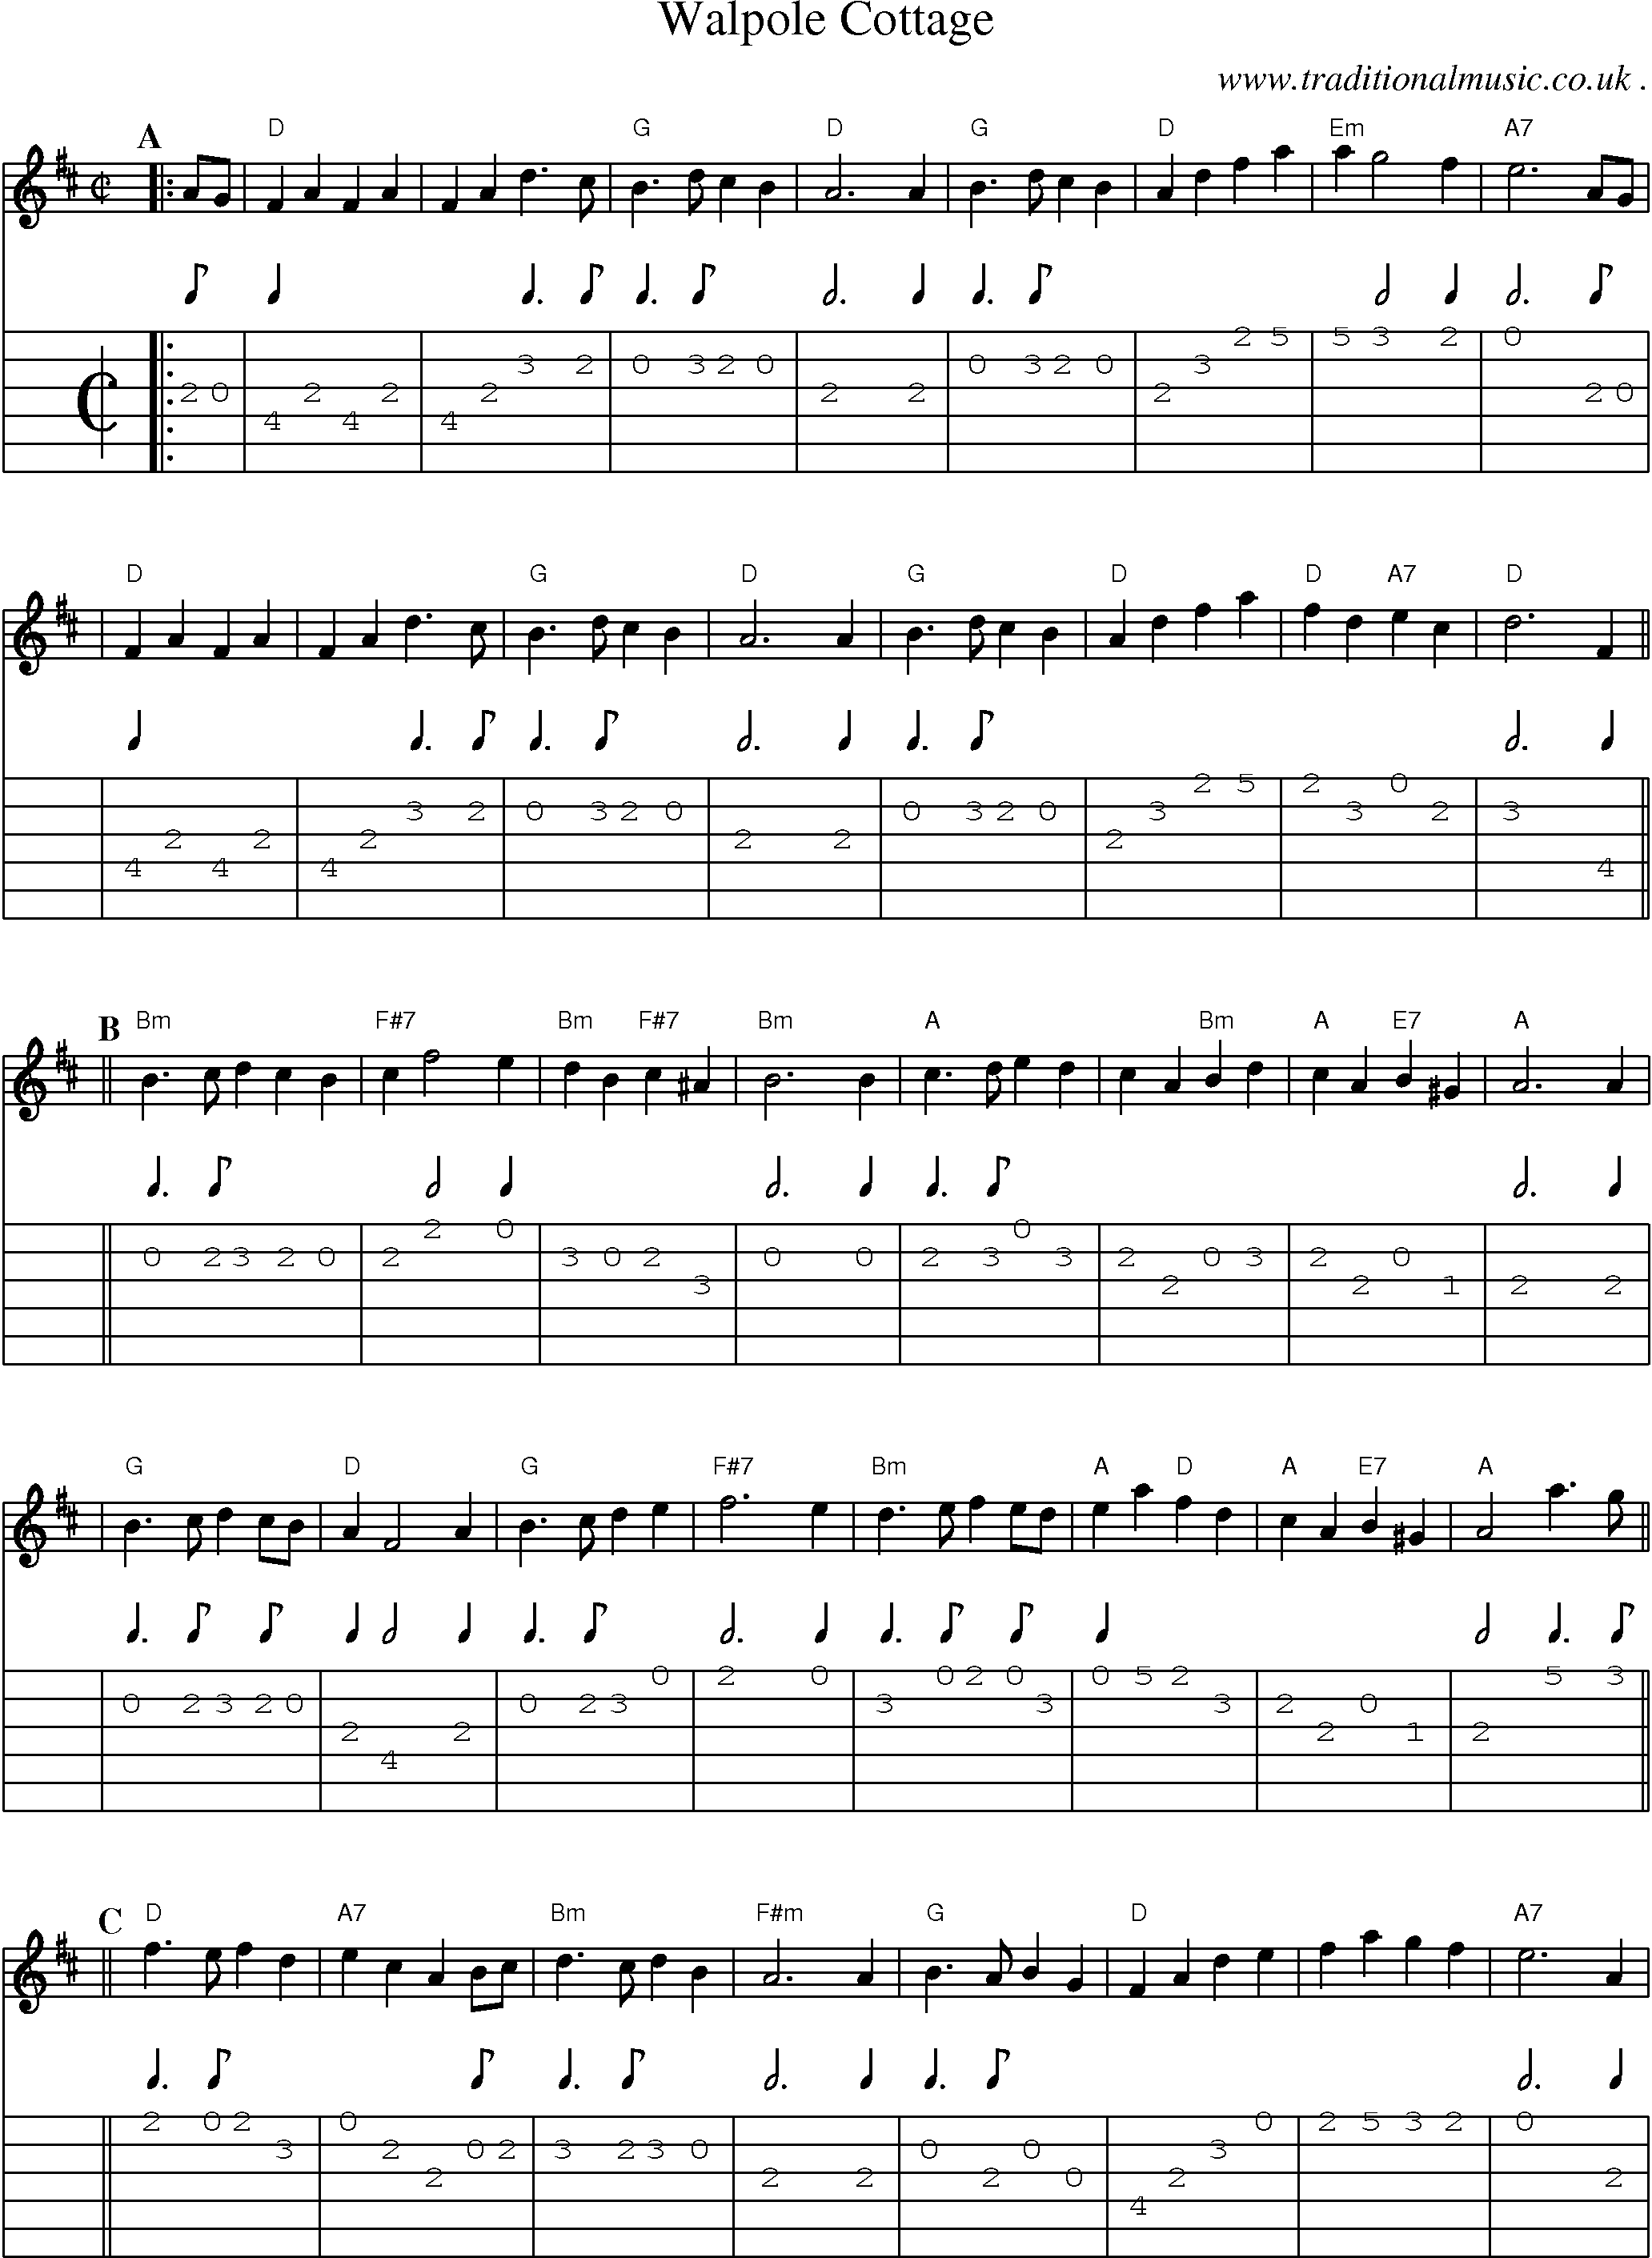 Sheet-Music and Guitar Tabs for Walpole Cottage